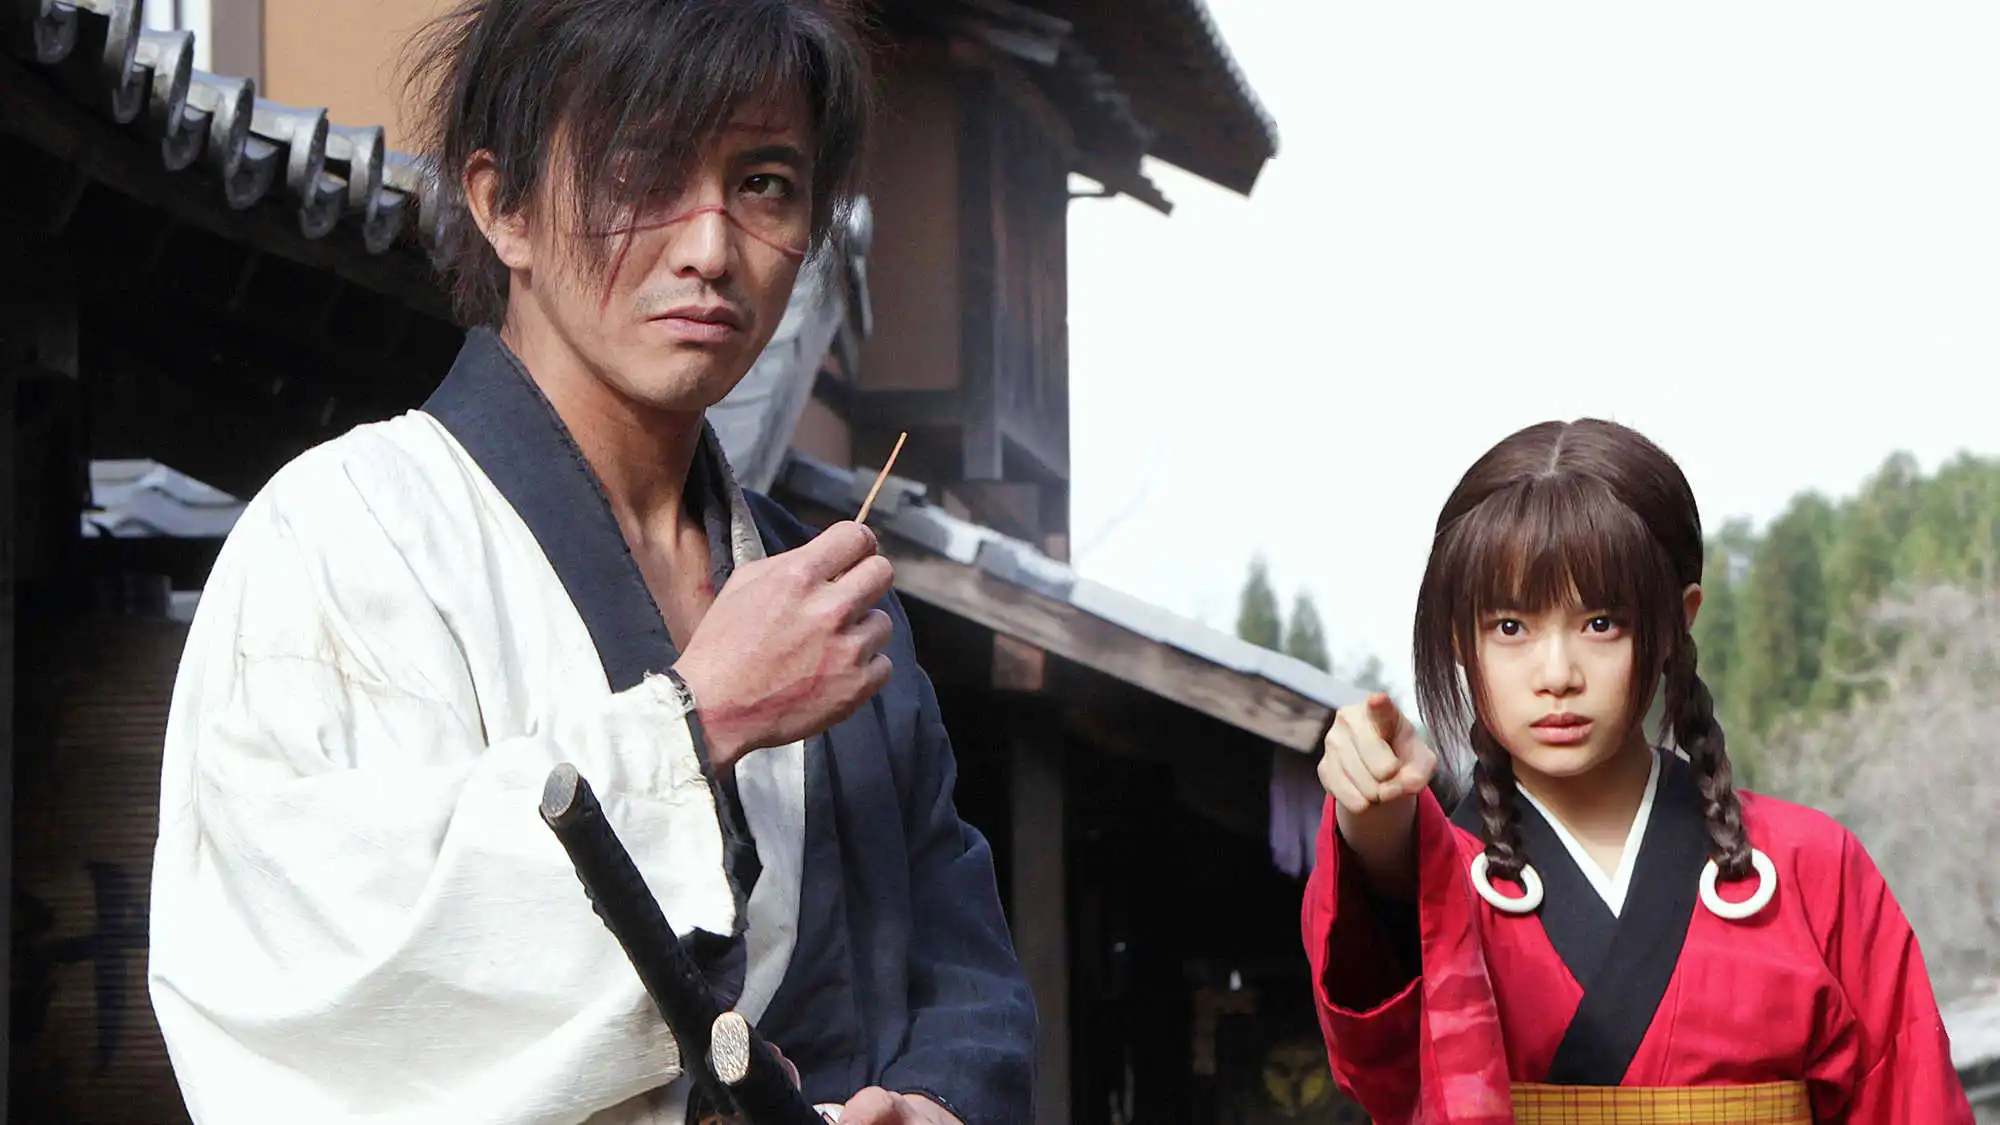 blade of the immortal anitube